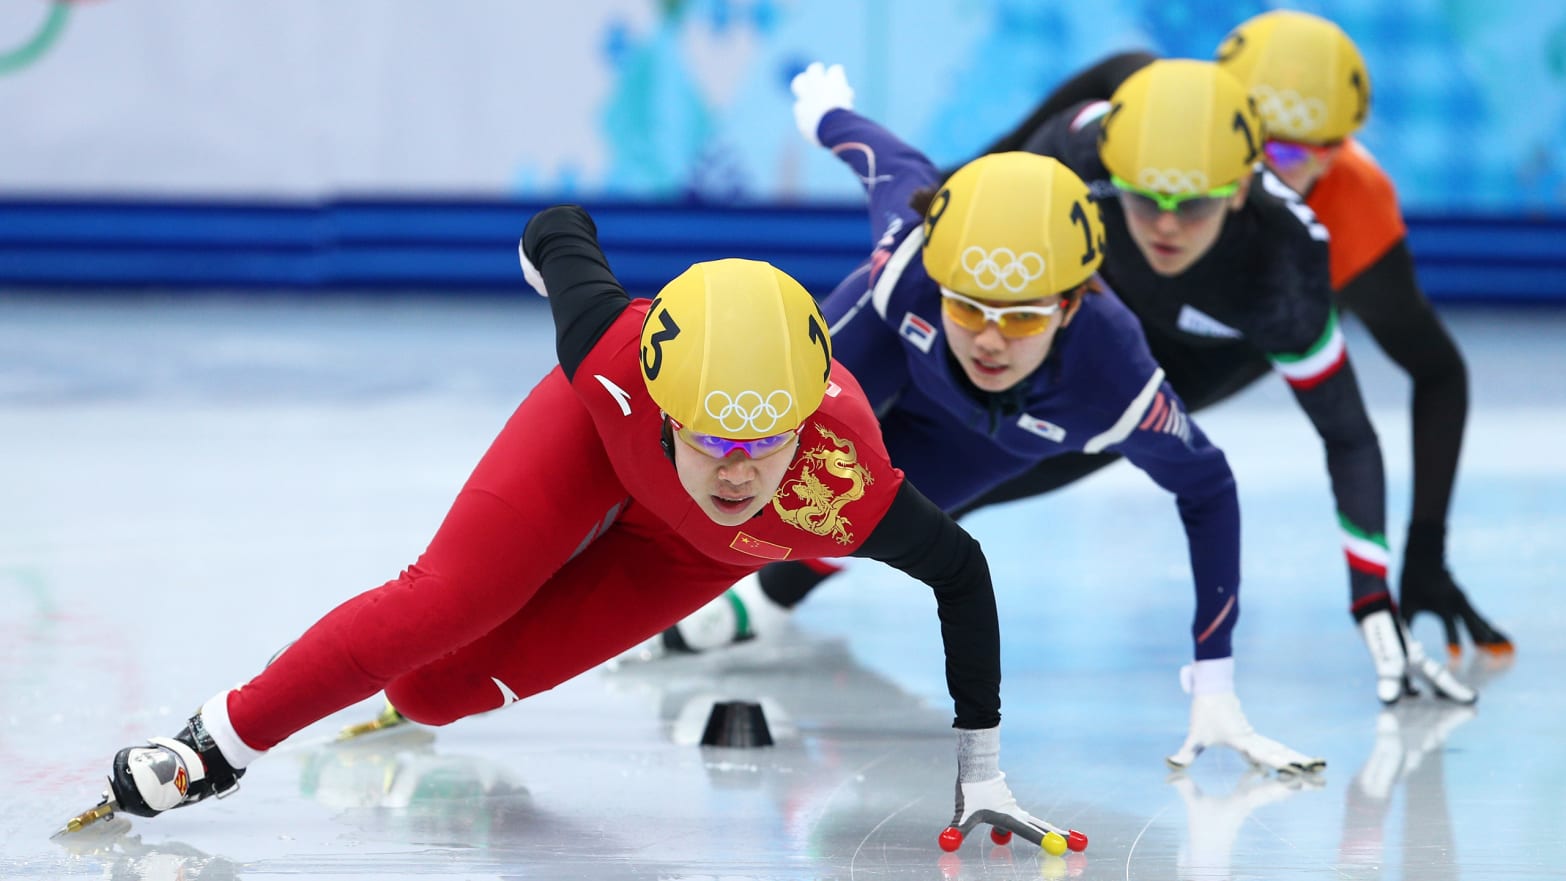 Short Track Speed Skating 2018 Olympics: Full Schedule and How to Watch